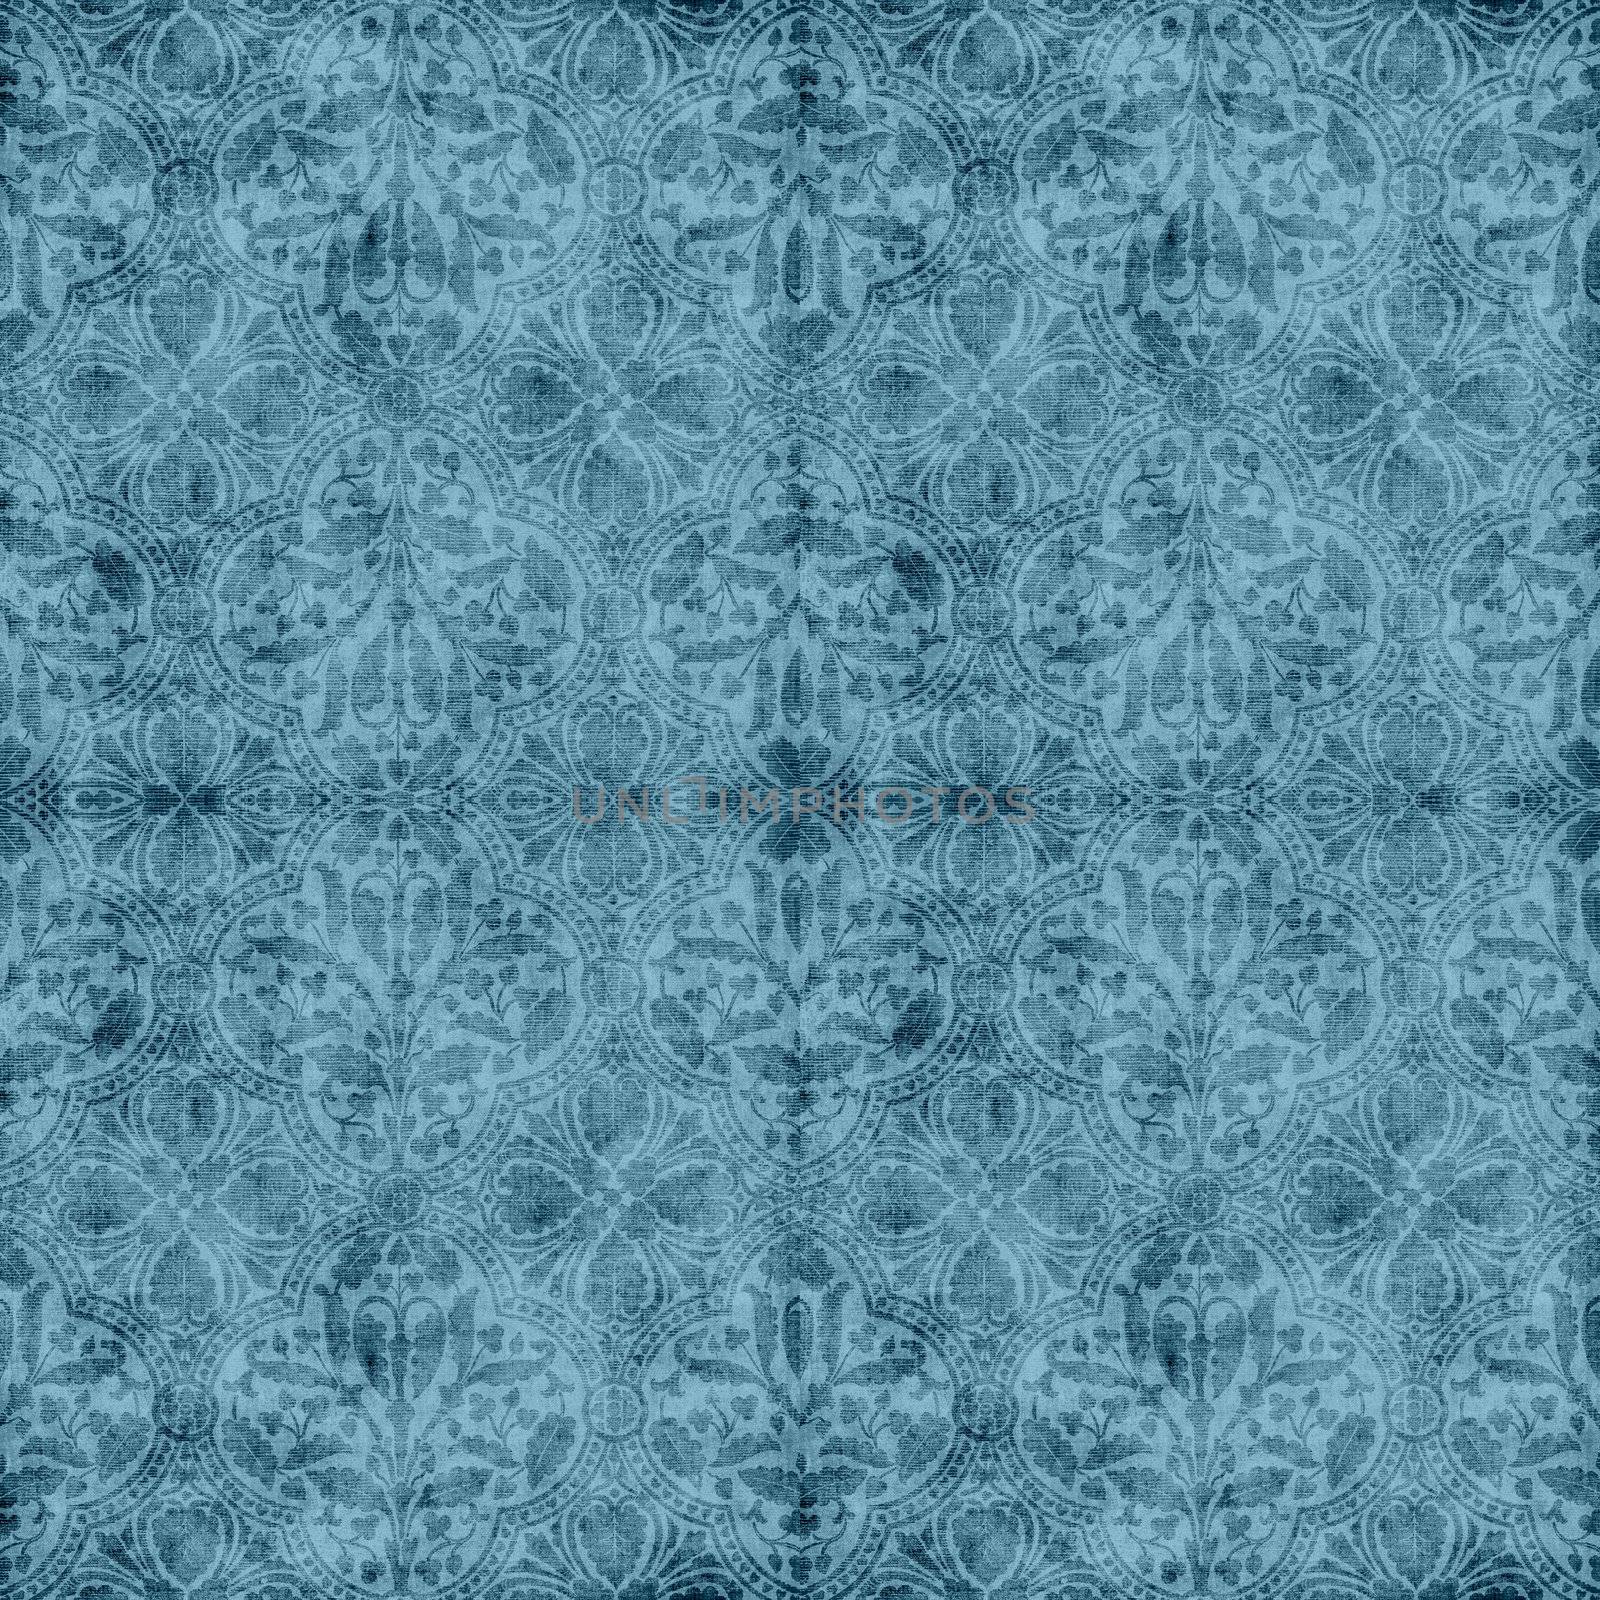 Seamless worn blue floral tapestry pattern